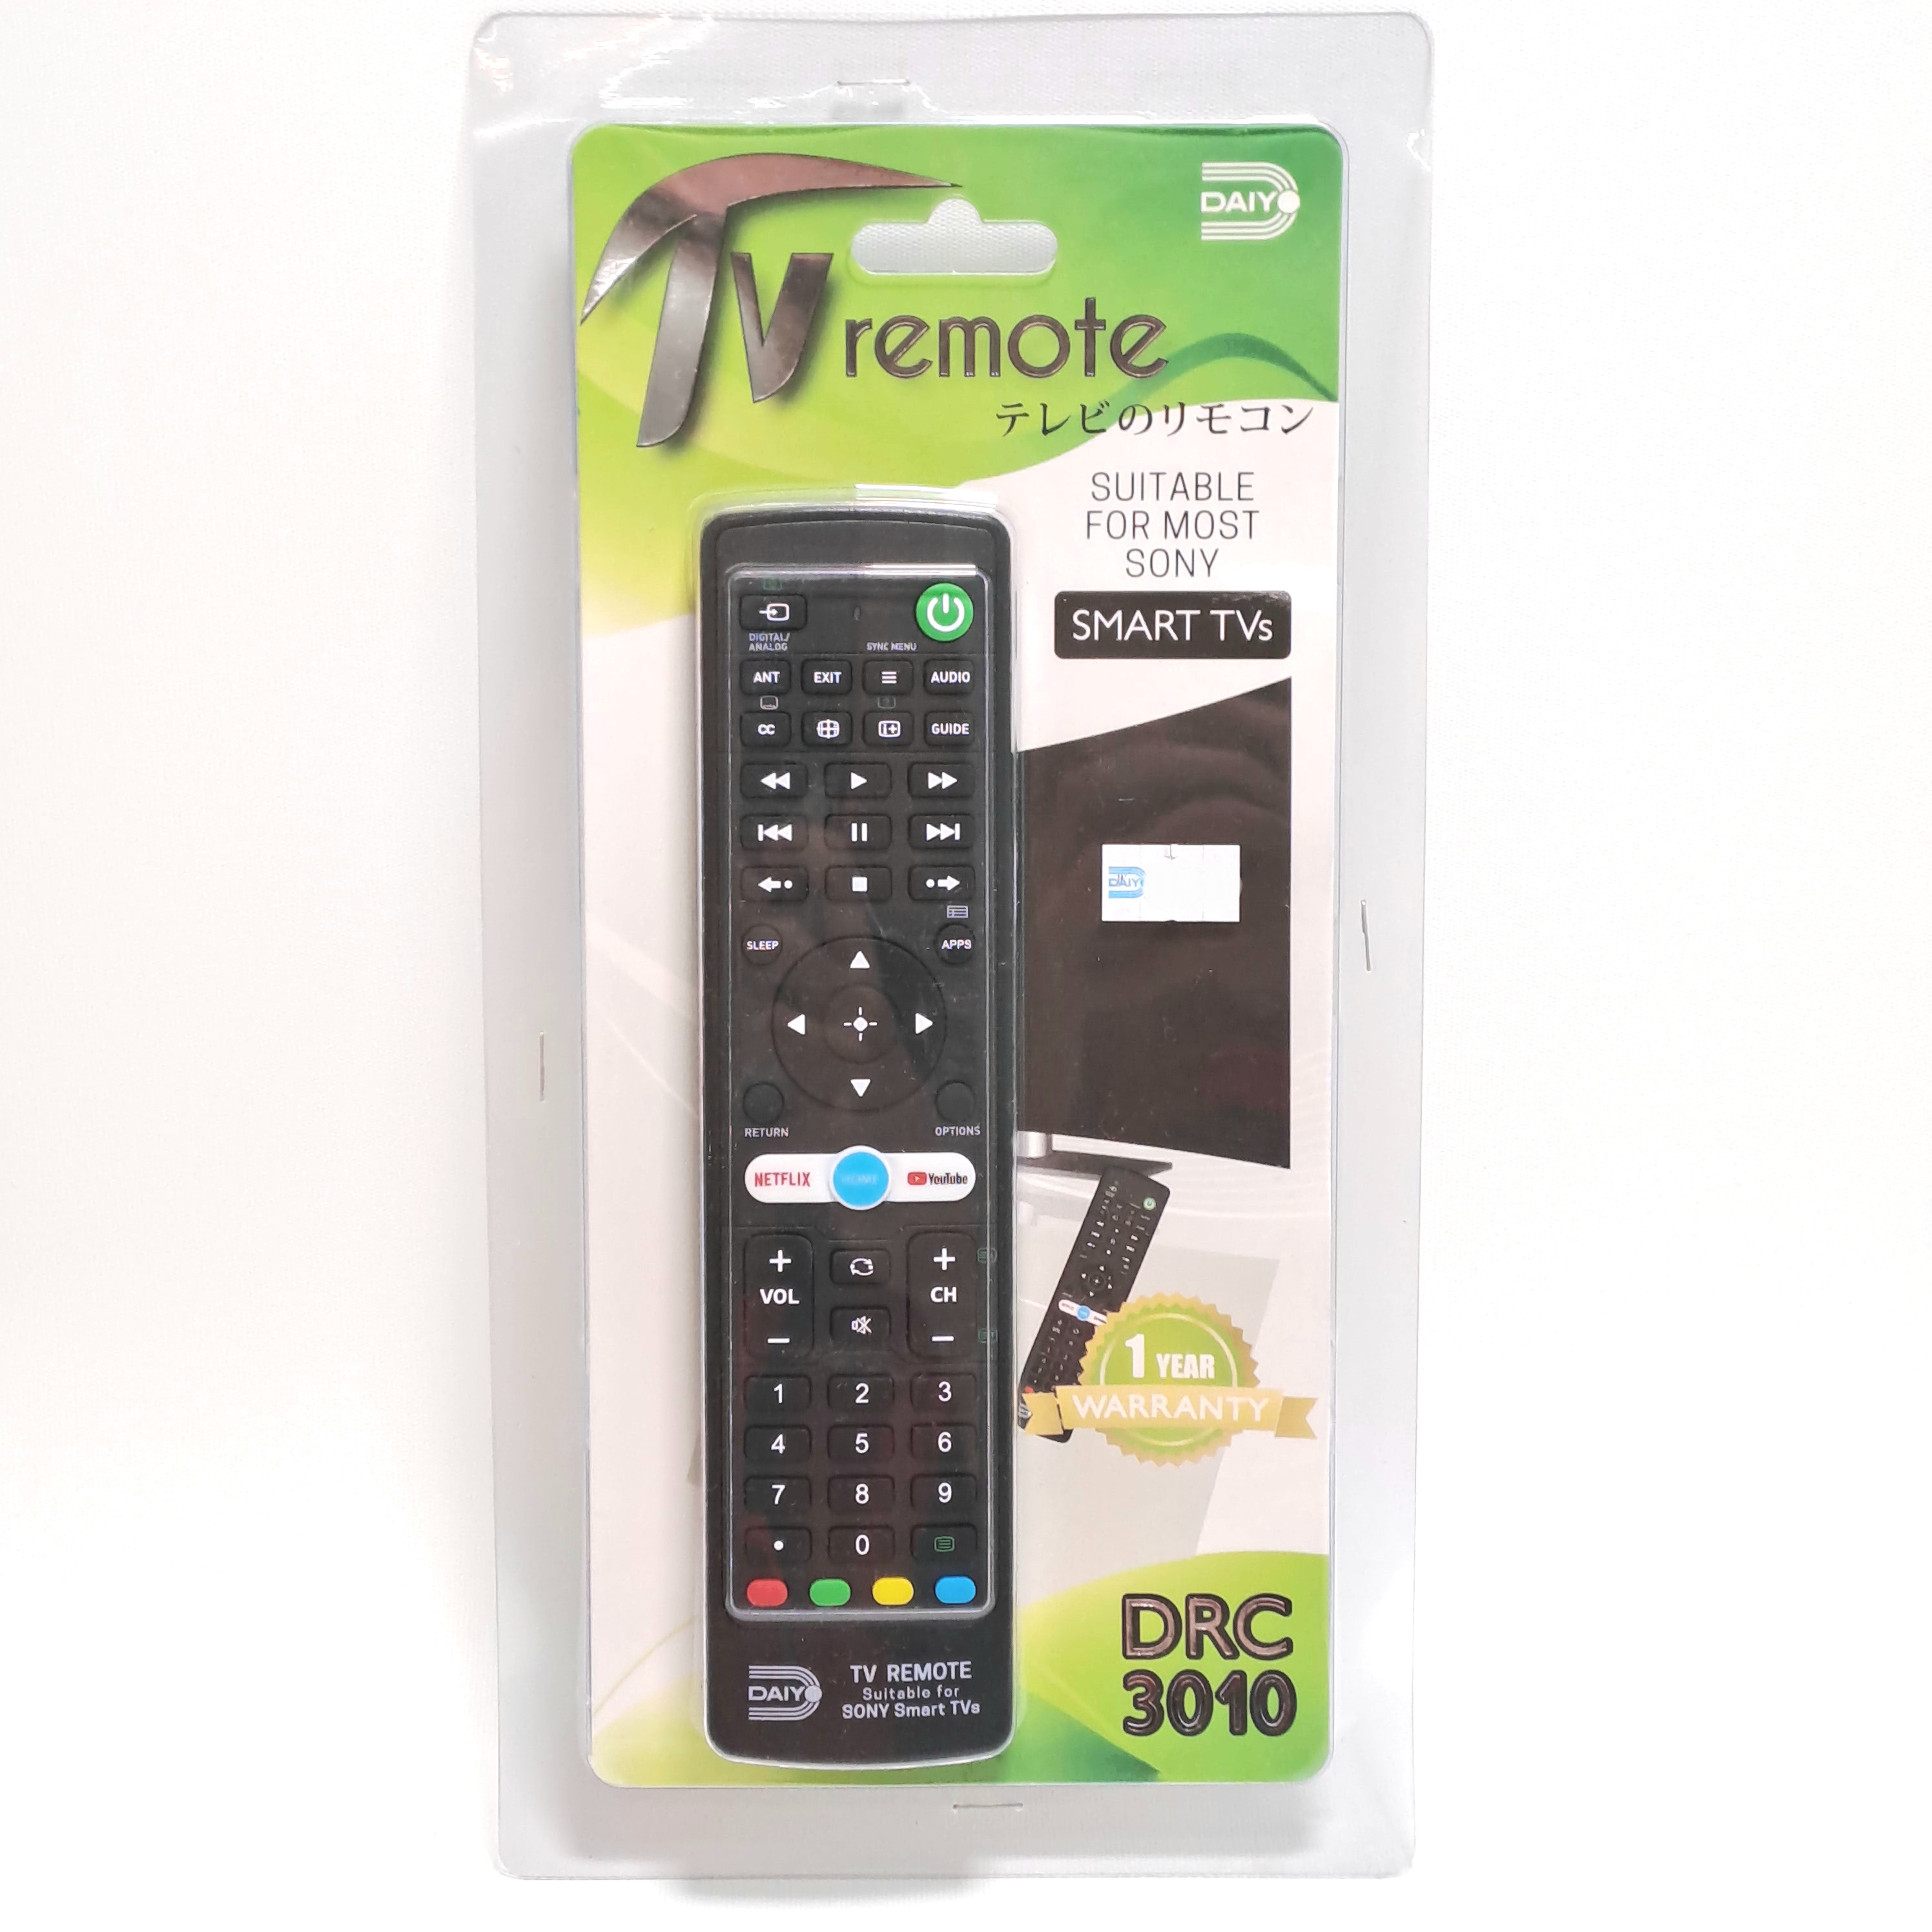 Remote Control For Sony Smart TV